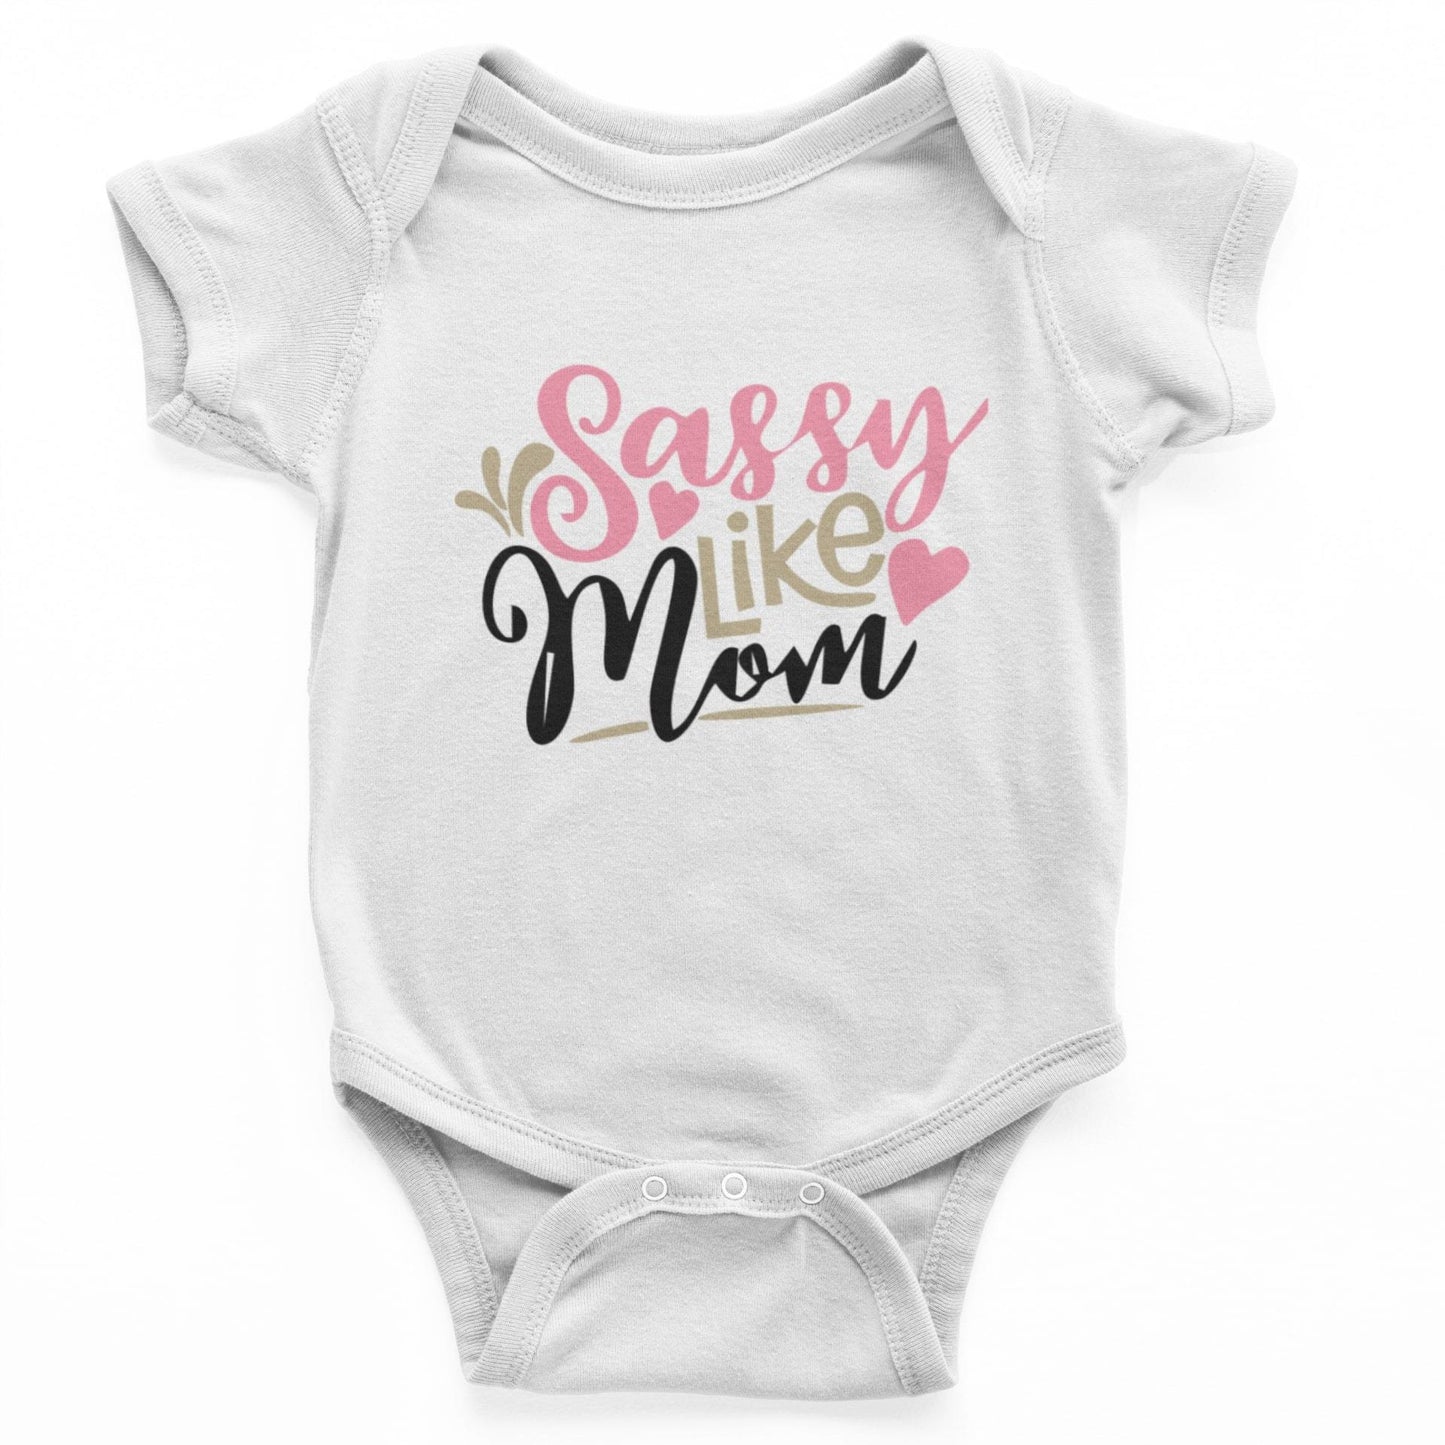 thelegalgang,Sassy like mom Rompers for Babies,.